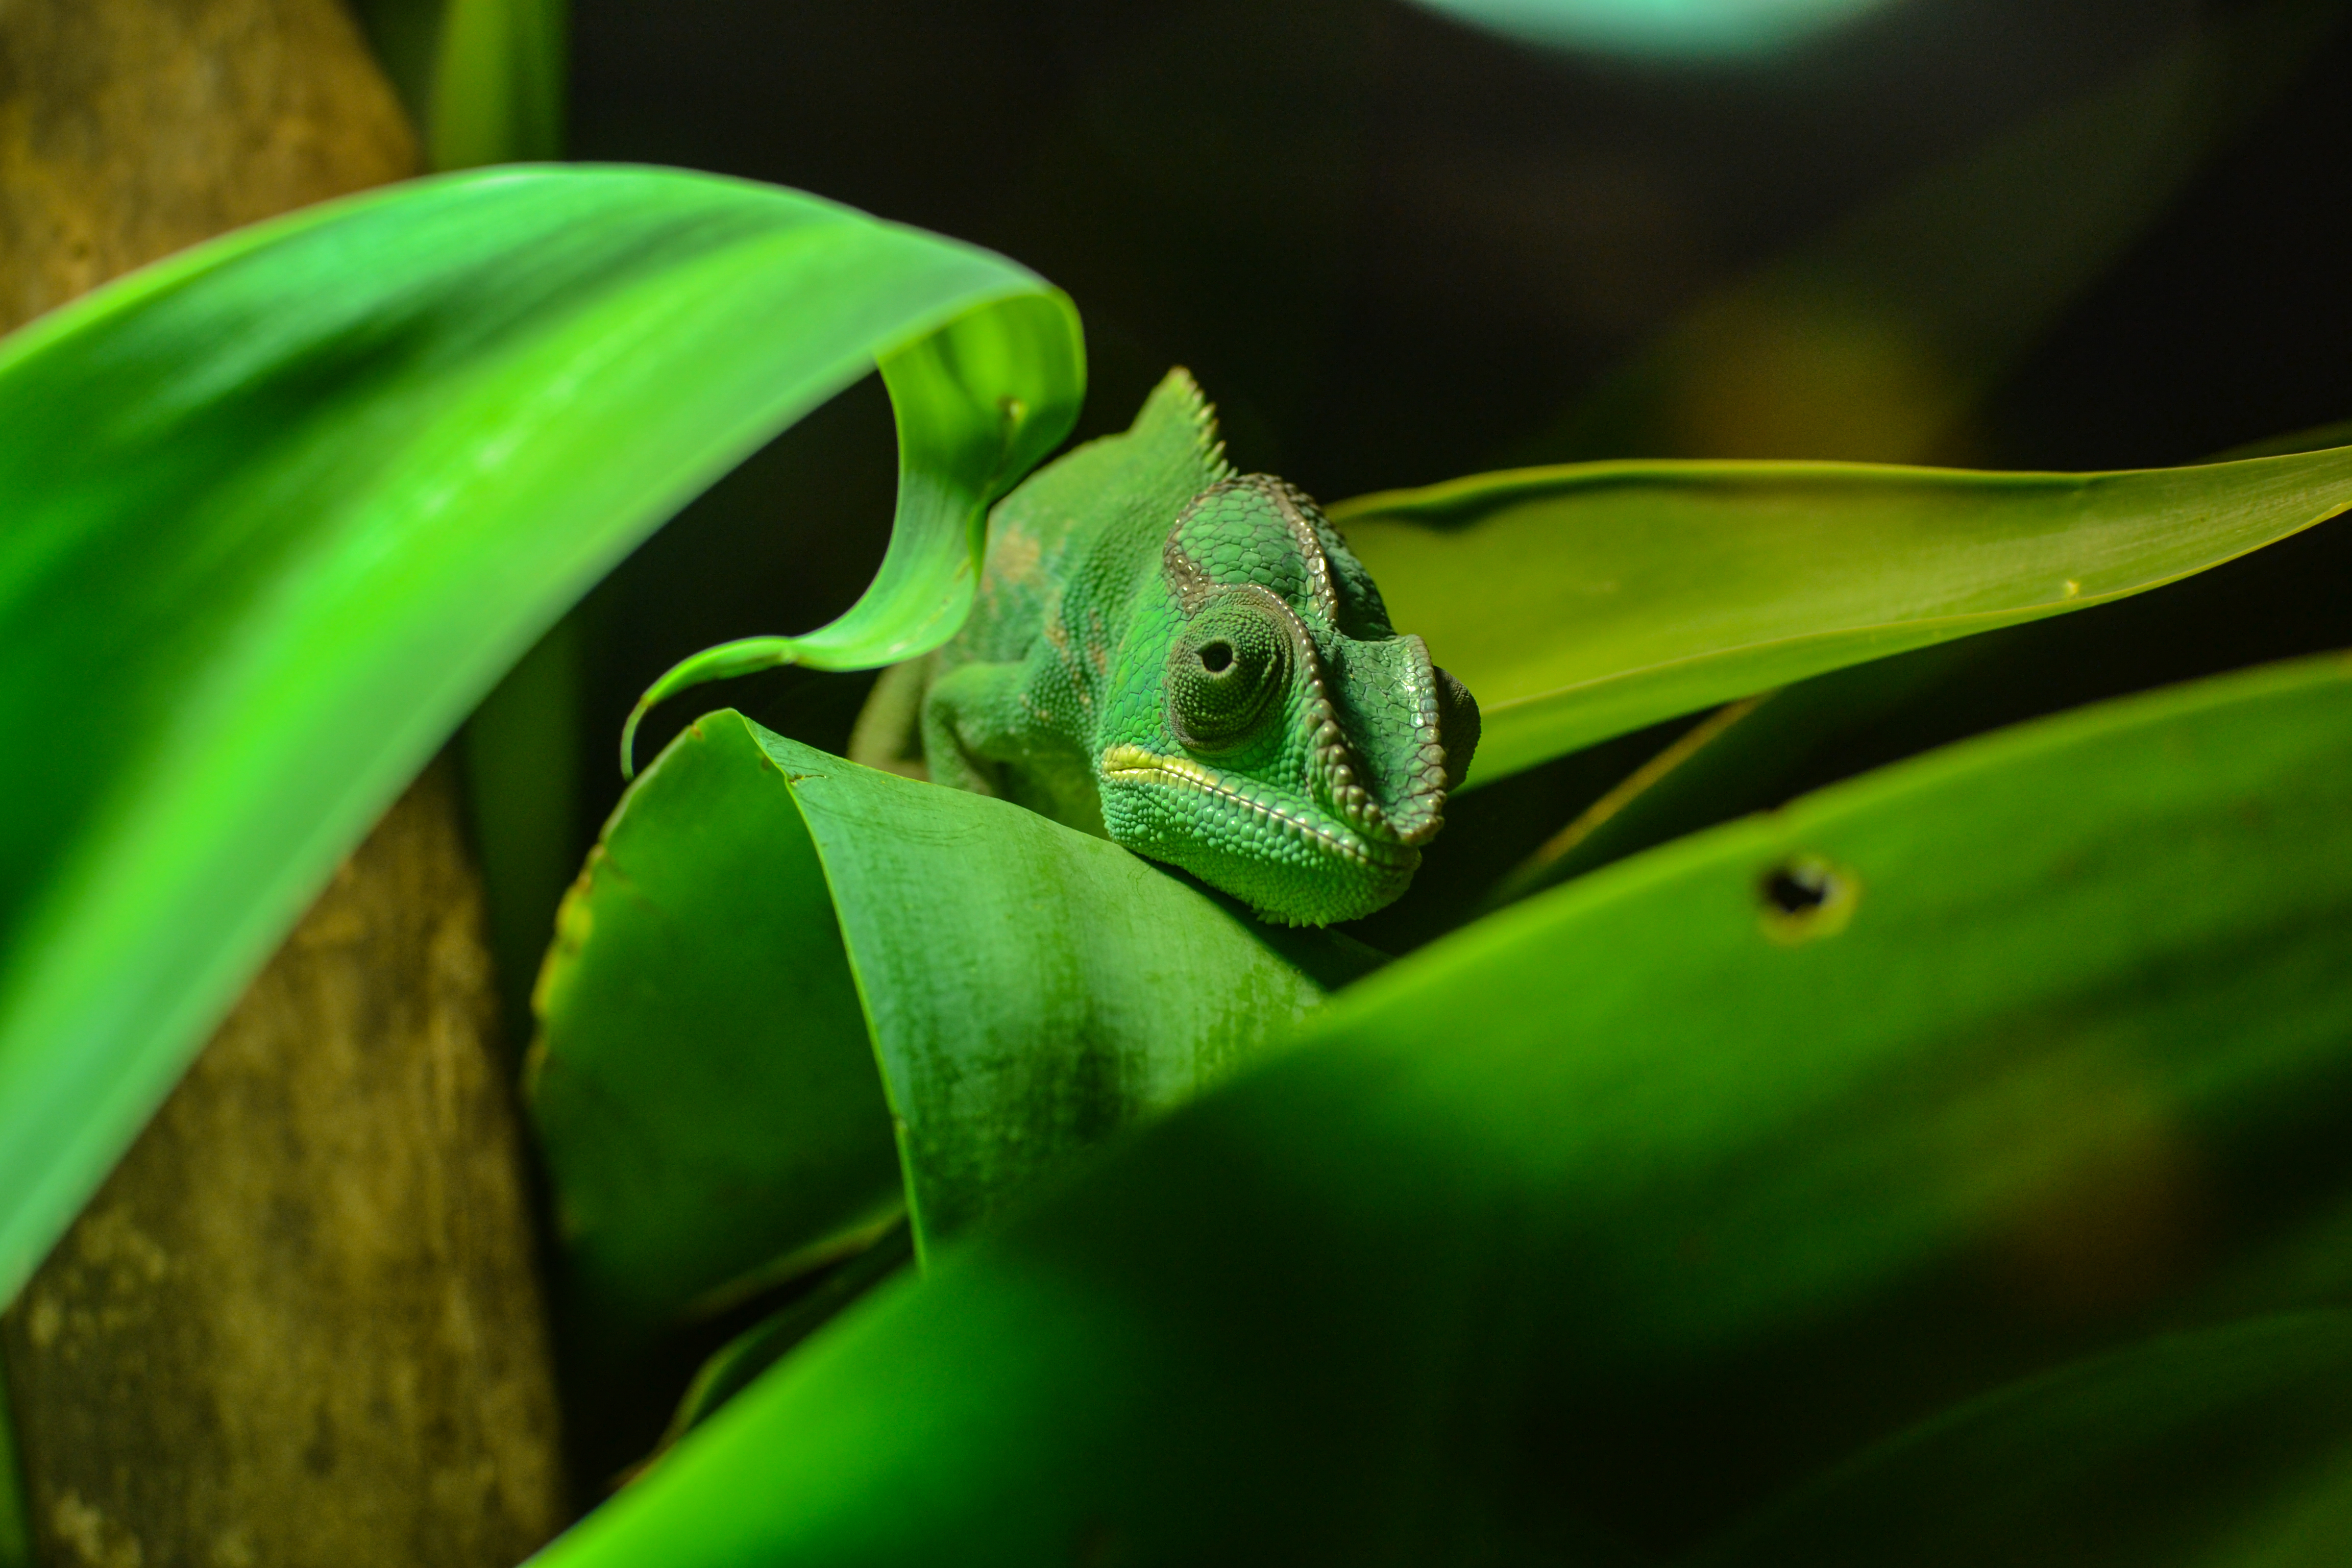 animals, color, foliage, reptile, disguise, camouflage, chameleon